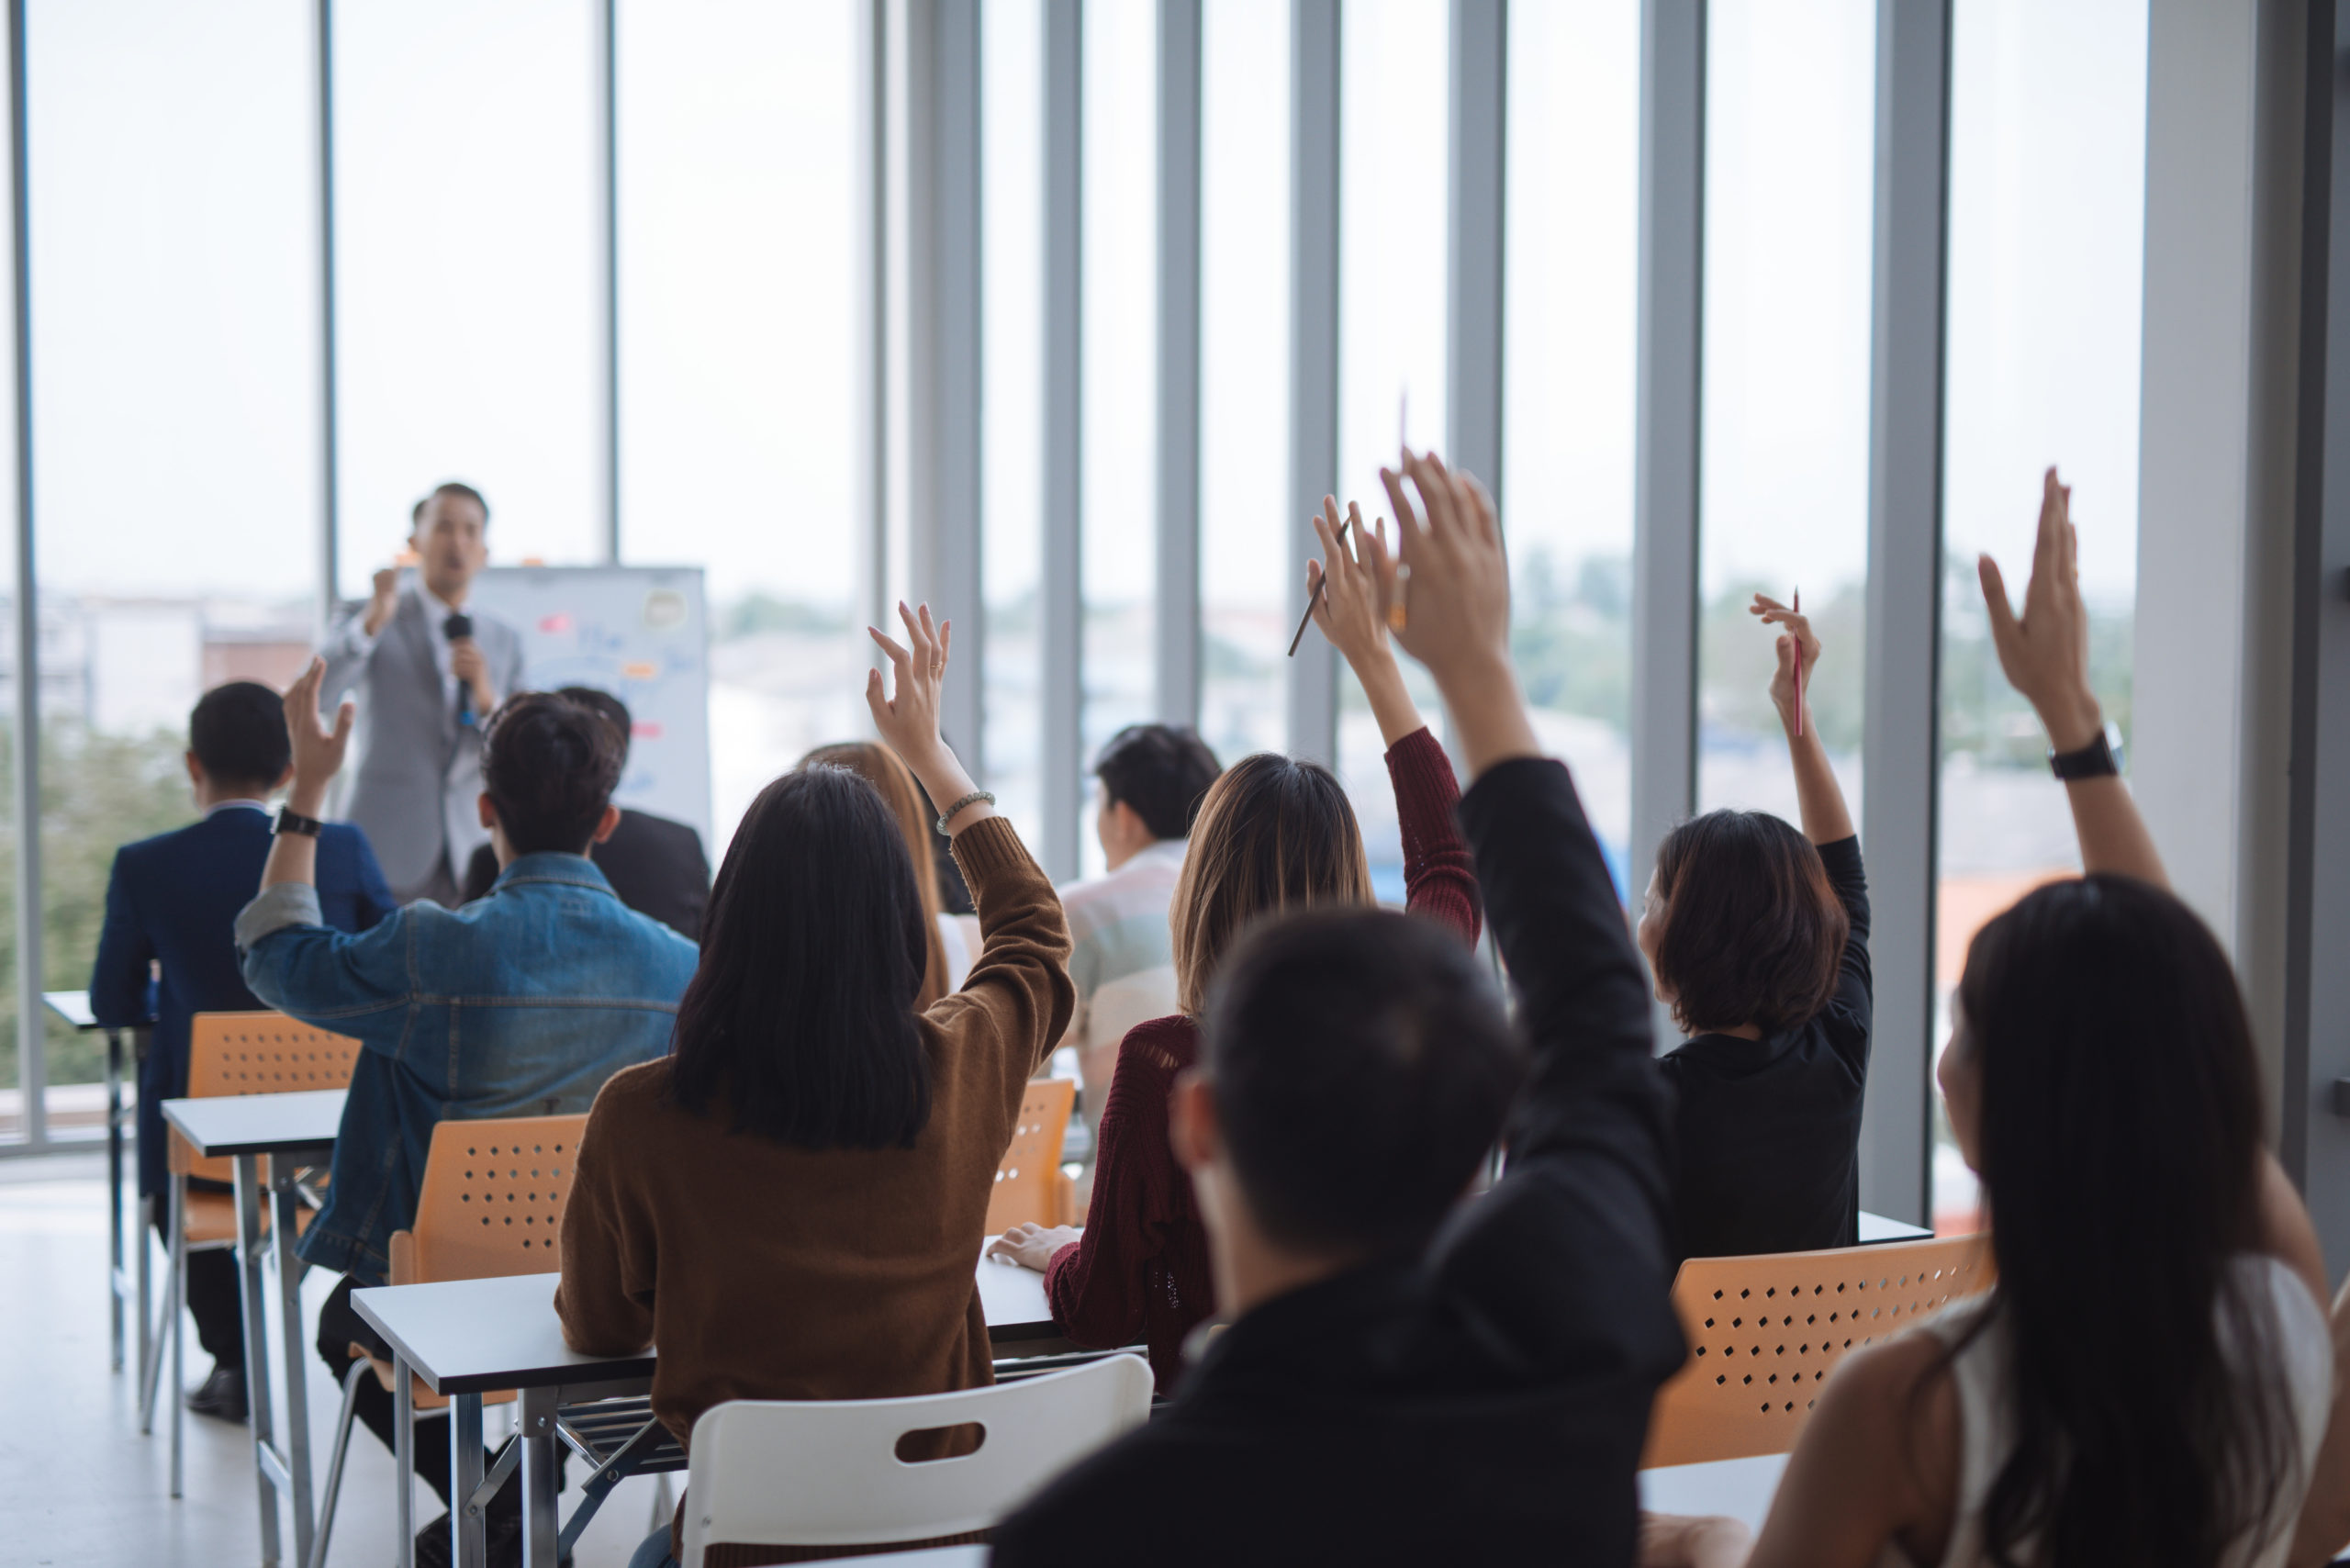 Raised up hands and arms of large group in seminar class room to agree with speaker at conference seminar meeting room